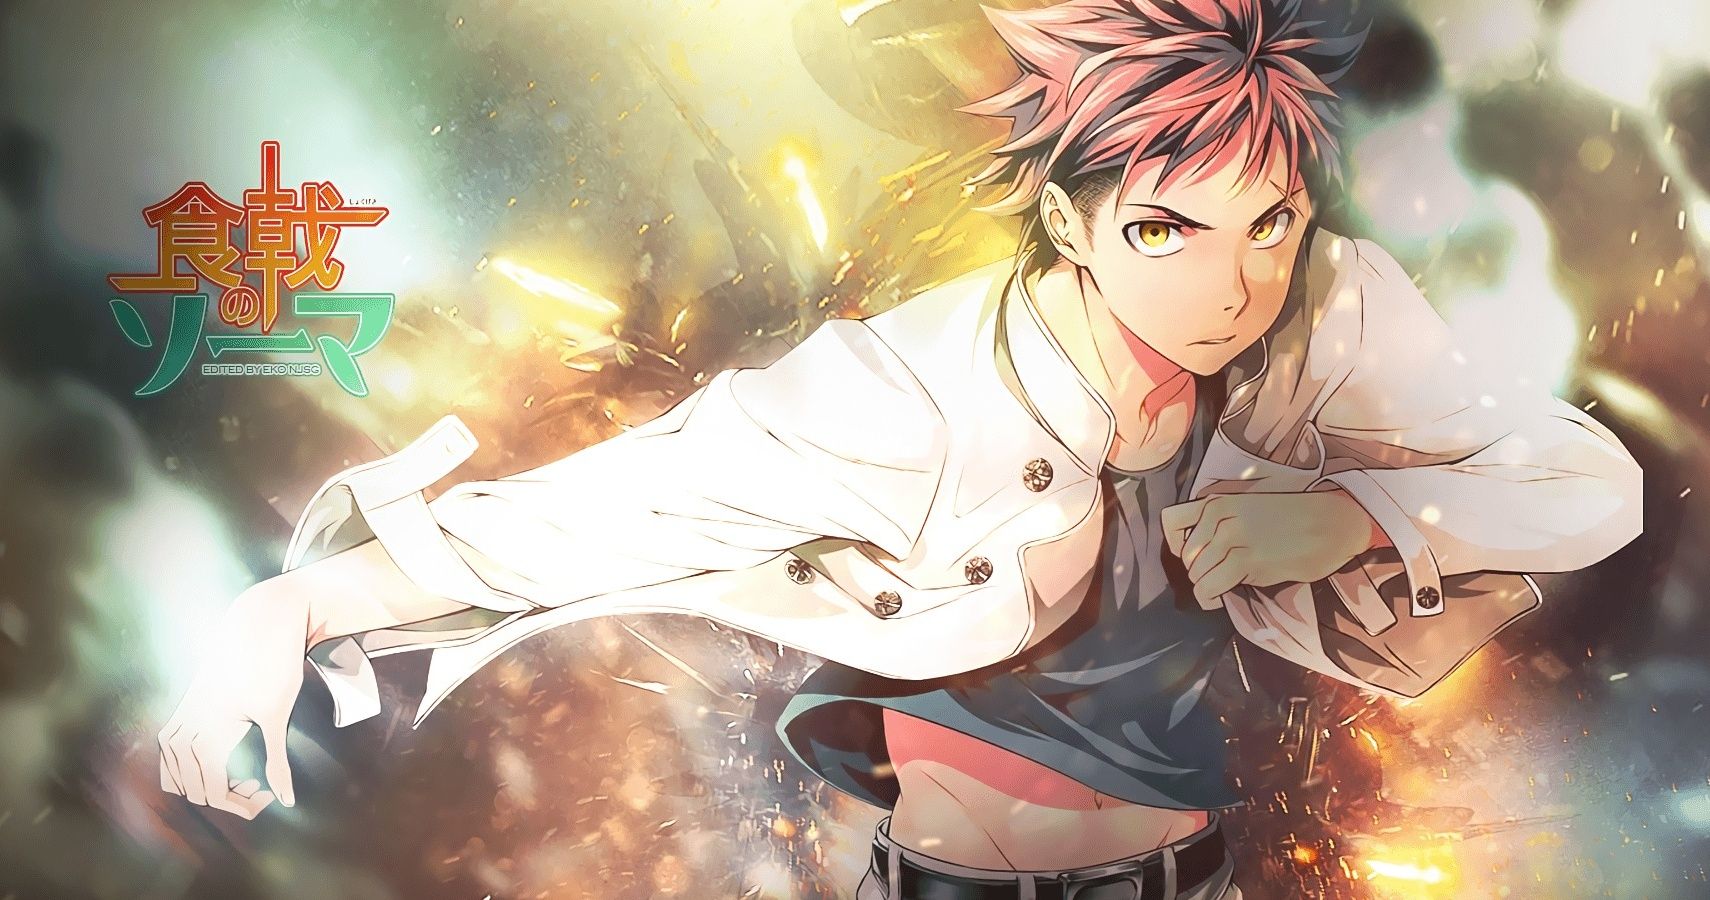 Food Wars: Soma's 5 Greatest Victories (& 5 Times He Was Defeated) - IMDb